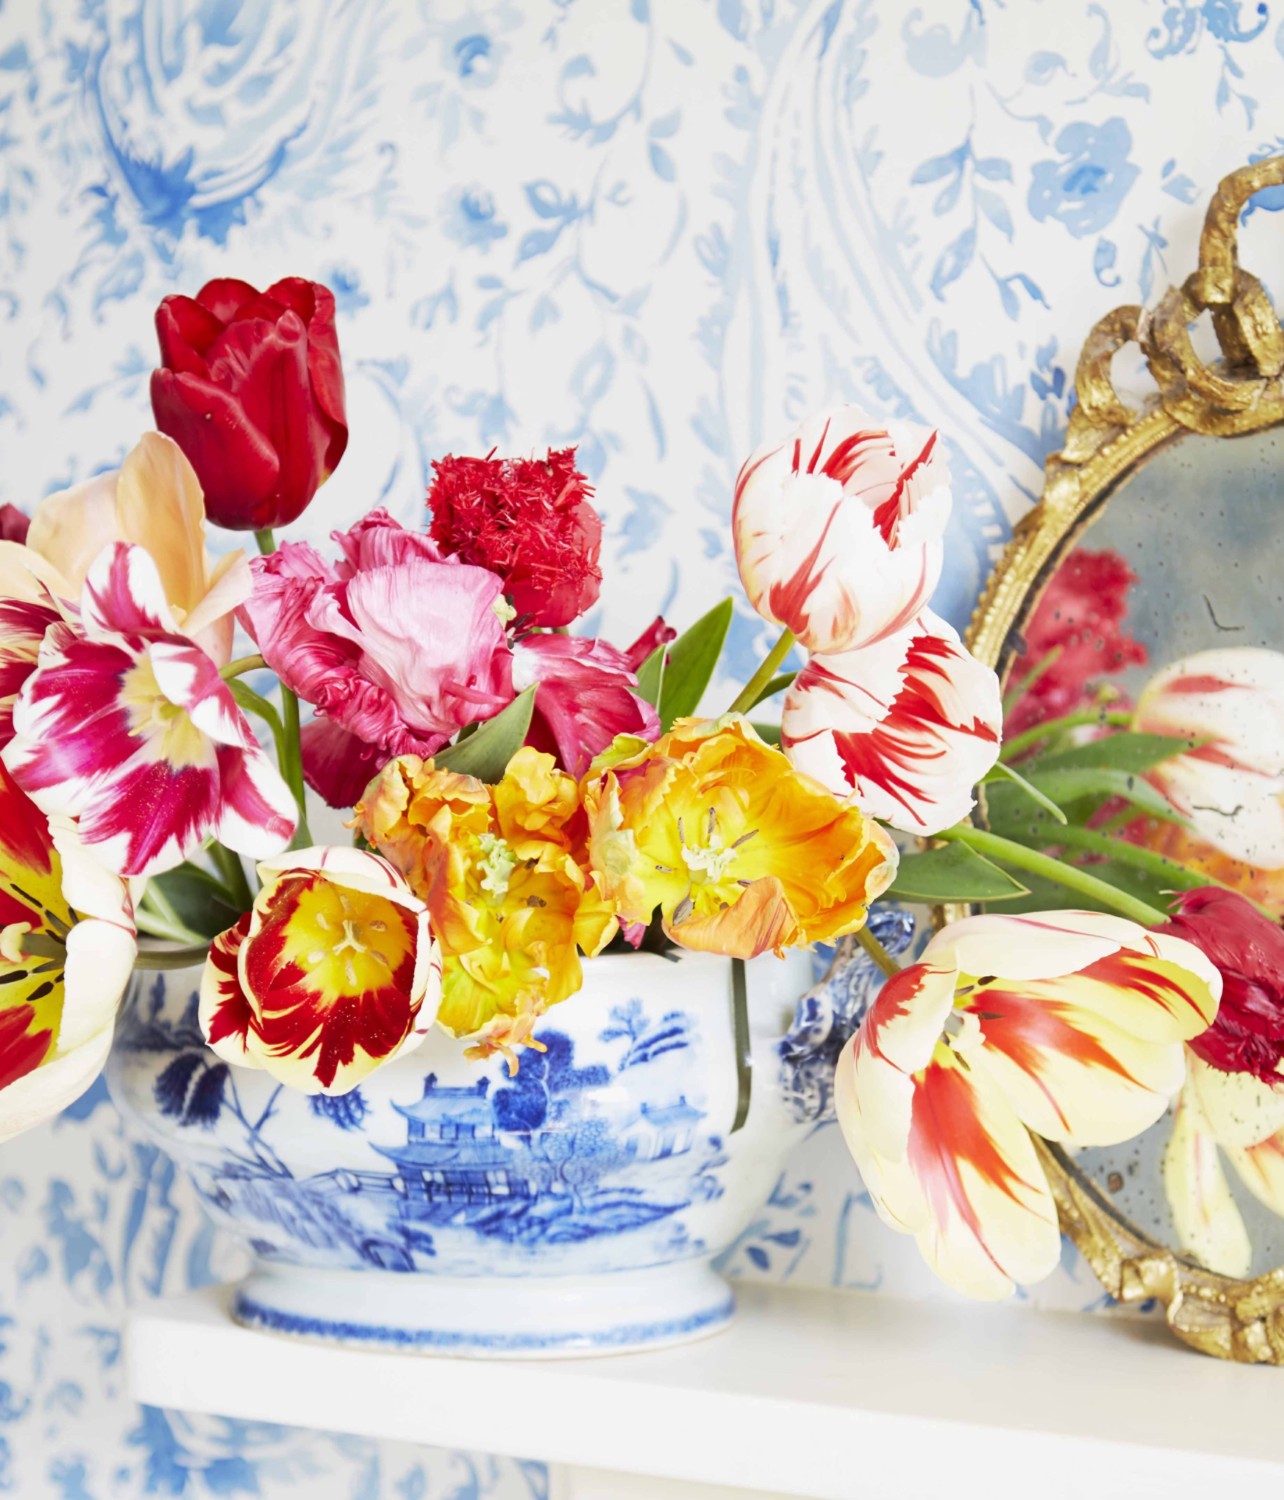 Arrangement of gold, red, pink, and striped tulips in a blue and white bowl